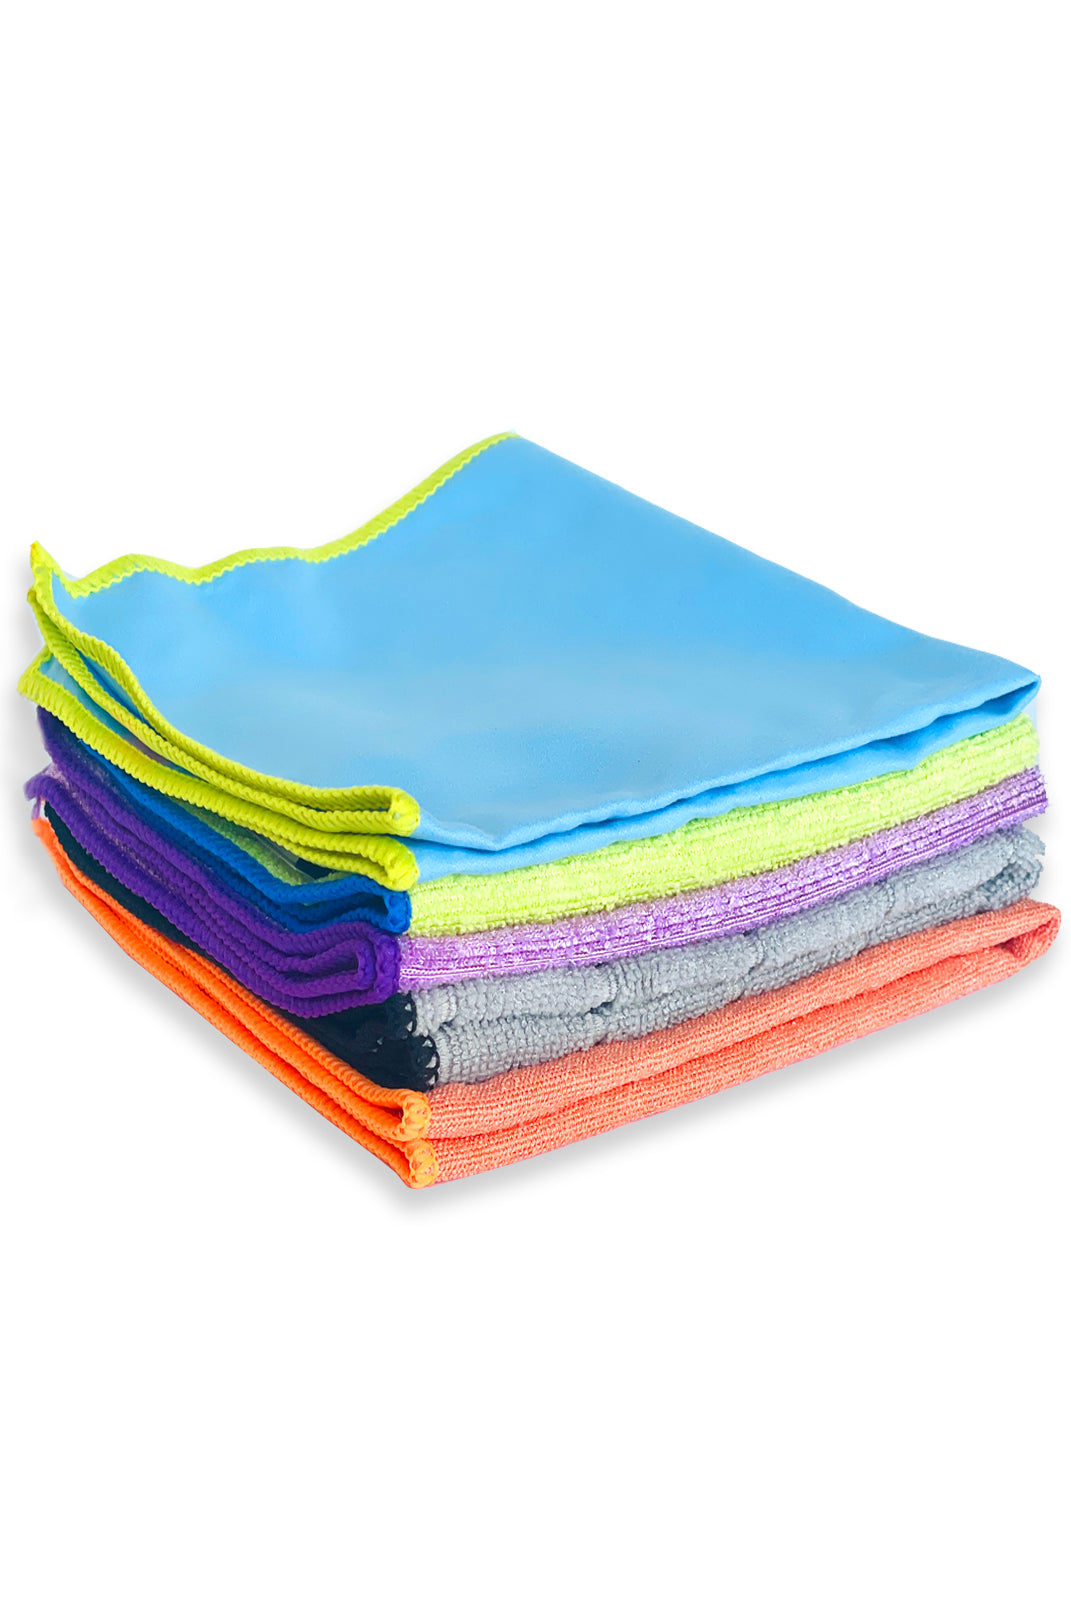 Reusable Microfiber Cleaning Cloths, 5ct